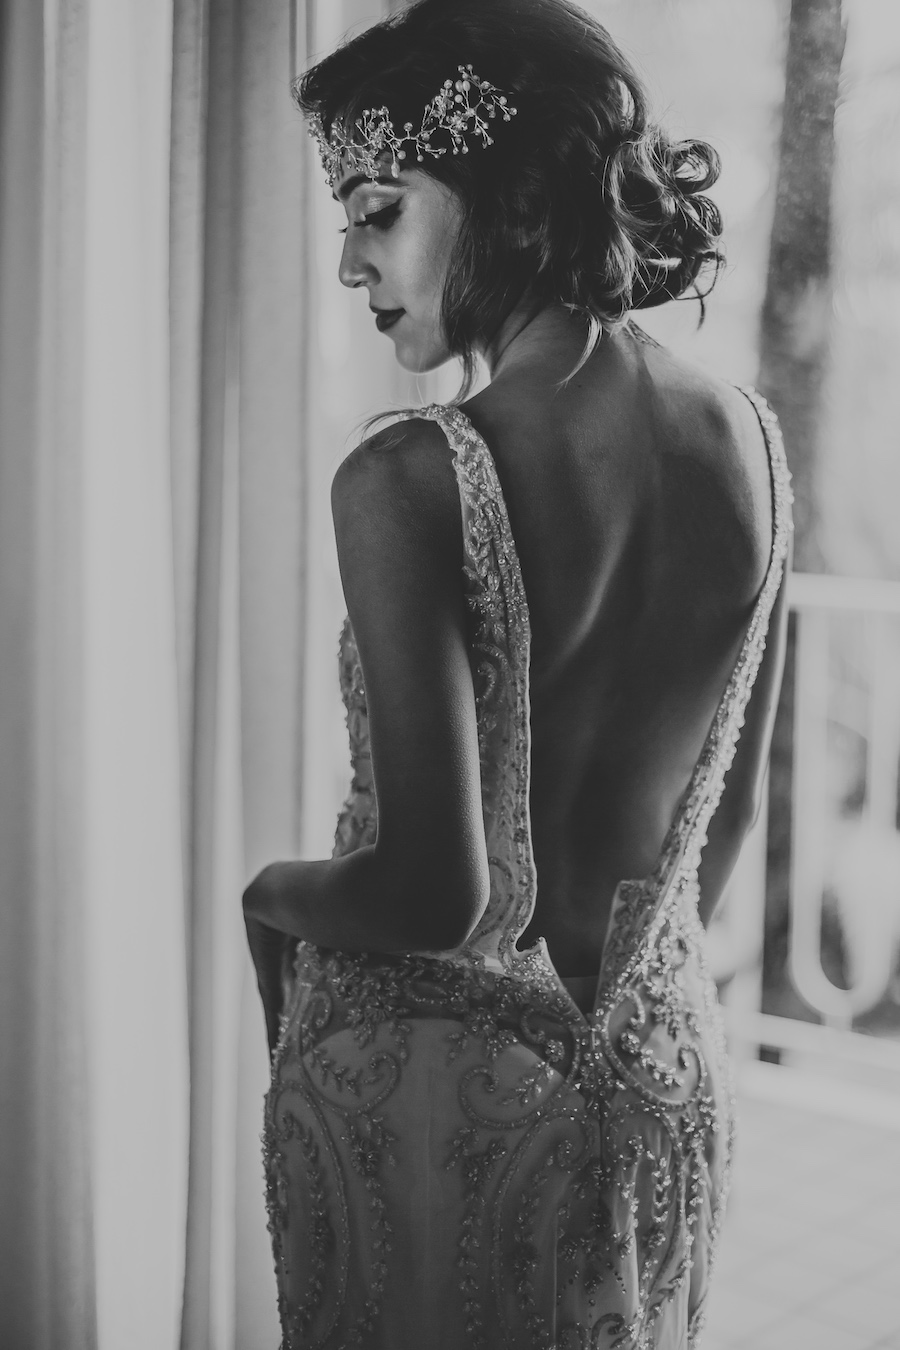 Vintage Glam 1920s Bride with Deep V-Neck Plunging Open Back Wedding Dress with Beading | Tampa Bay Wedding Photographer Brandi Image Photography